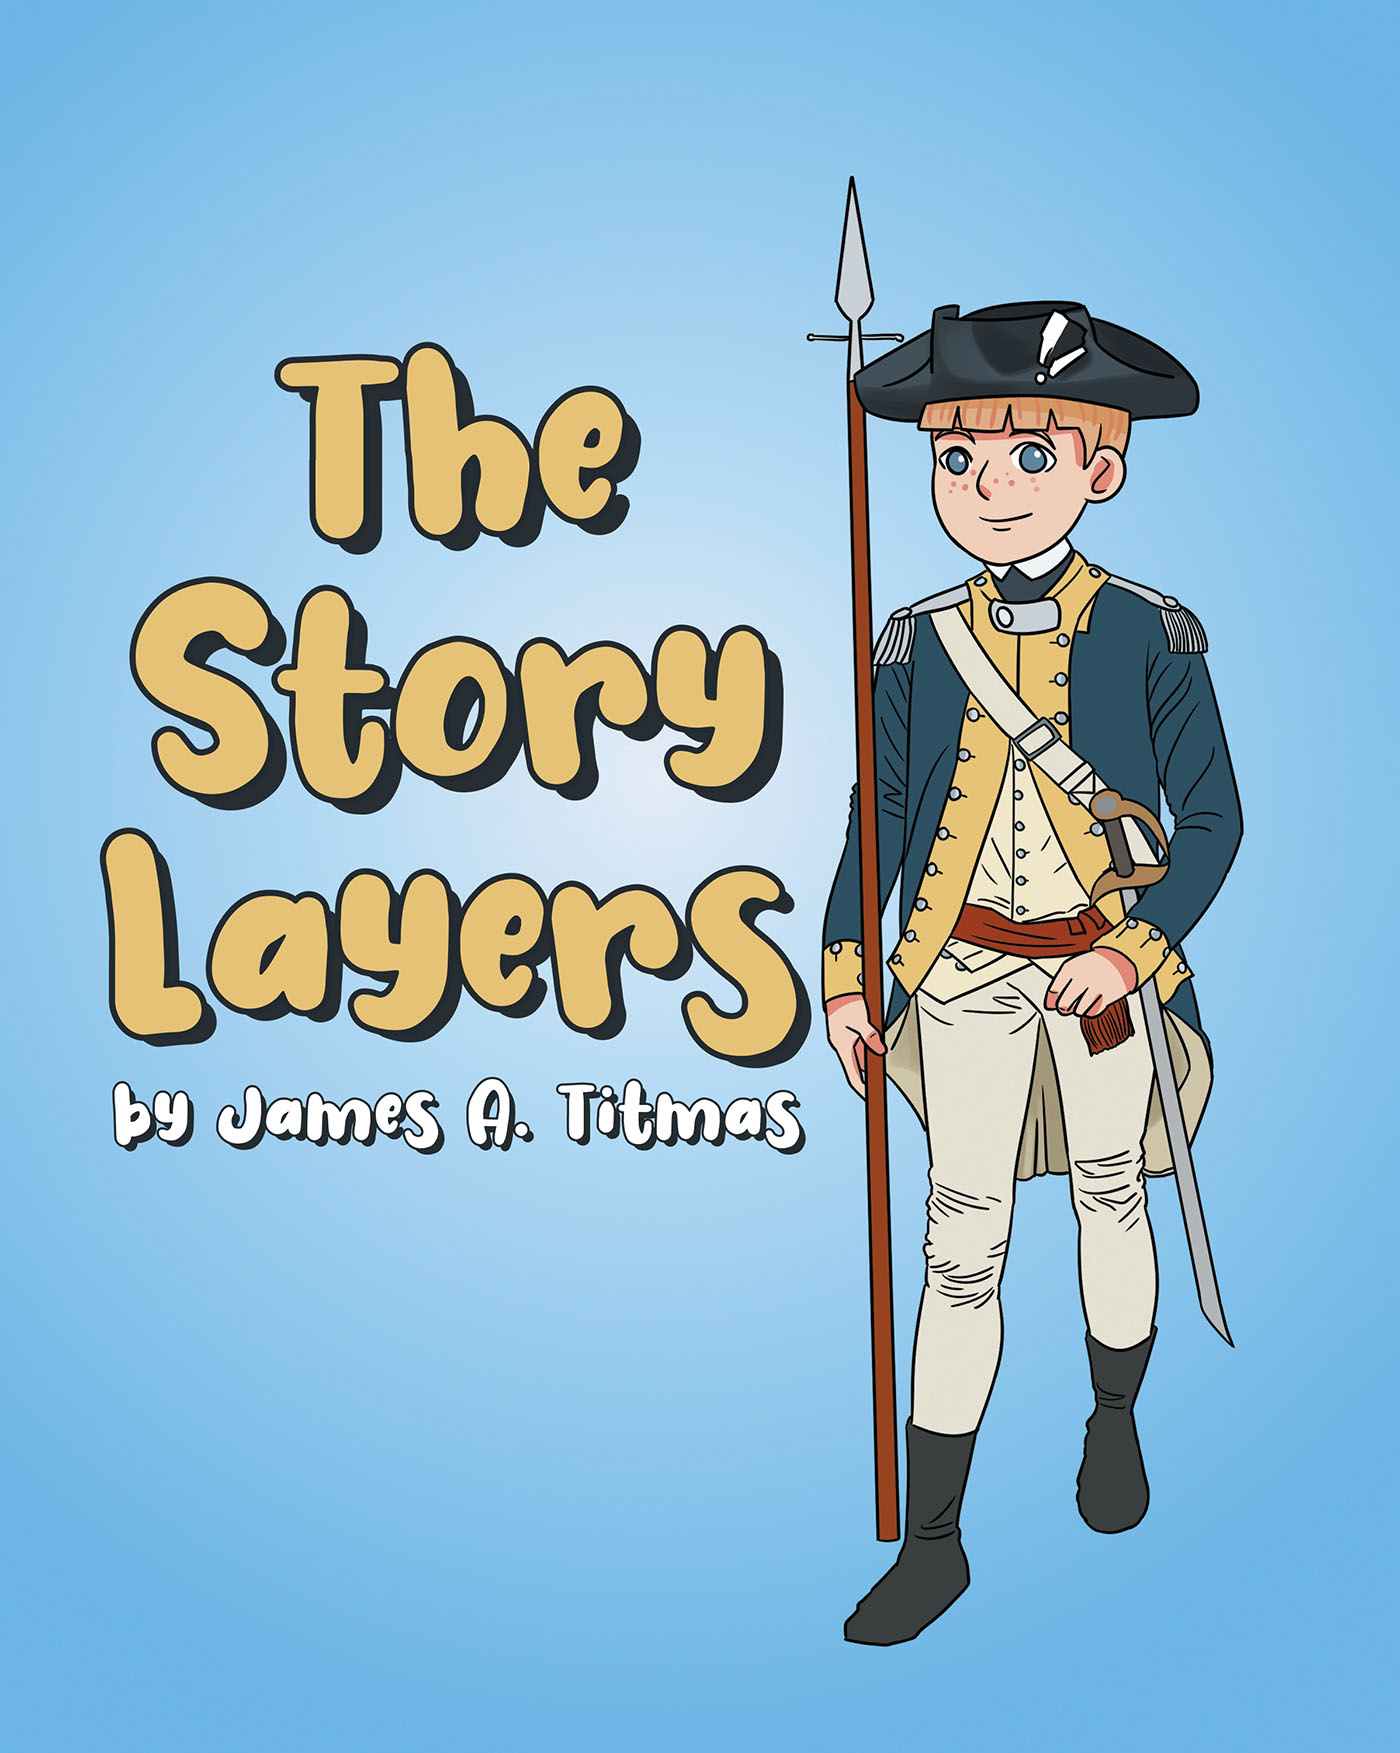 Author James Titmas’s New Book, "The Story Layers," is a Compelling Children’s Story About Three Kids Who Love to Hear Stories from Jimmy’s Grandfather